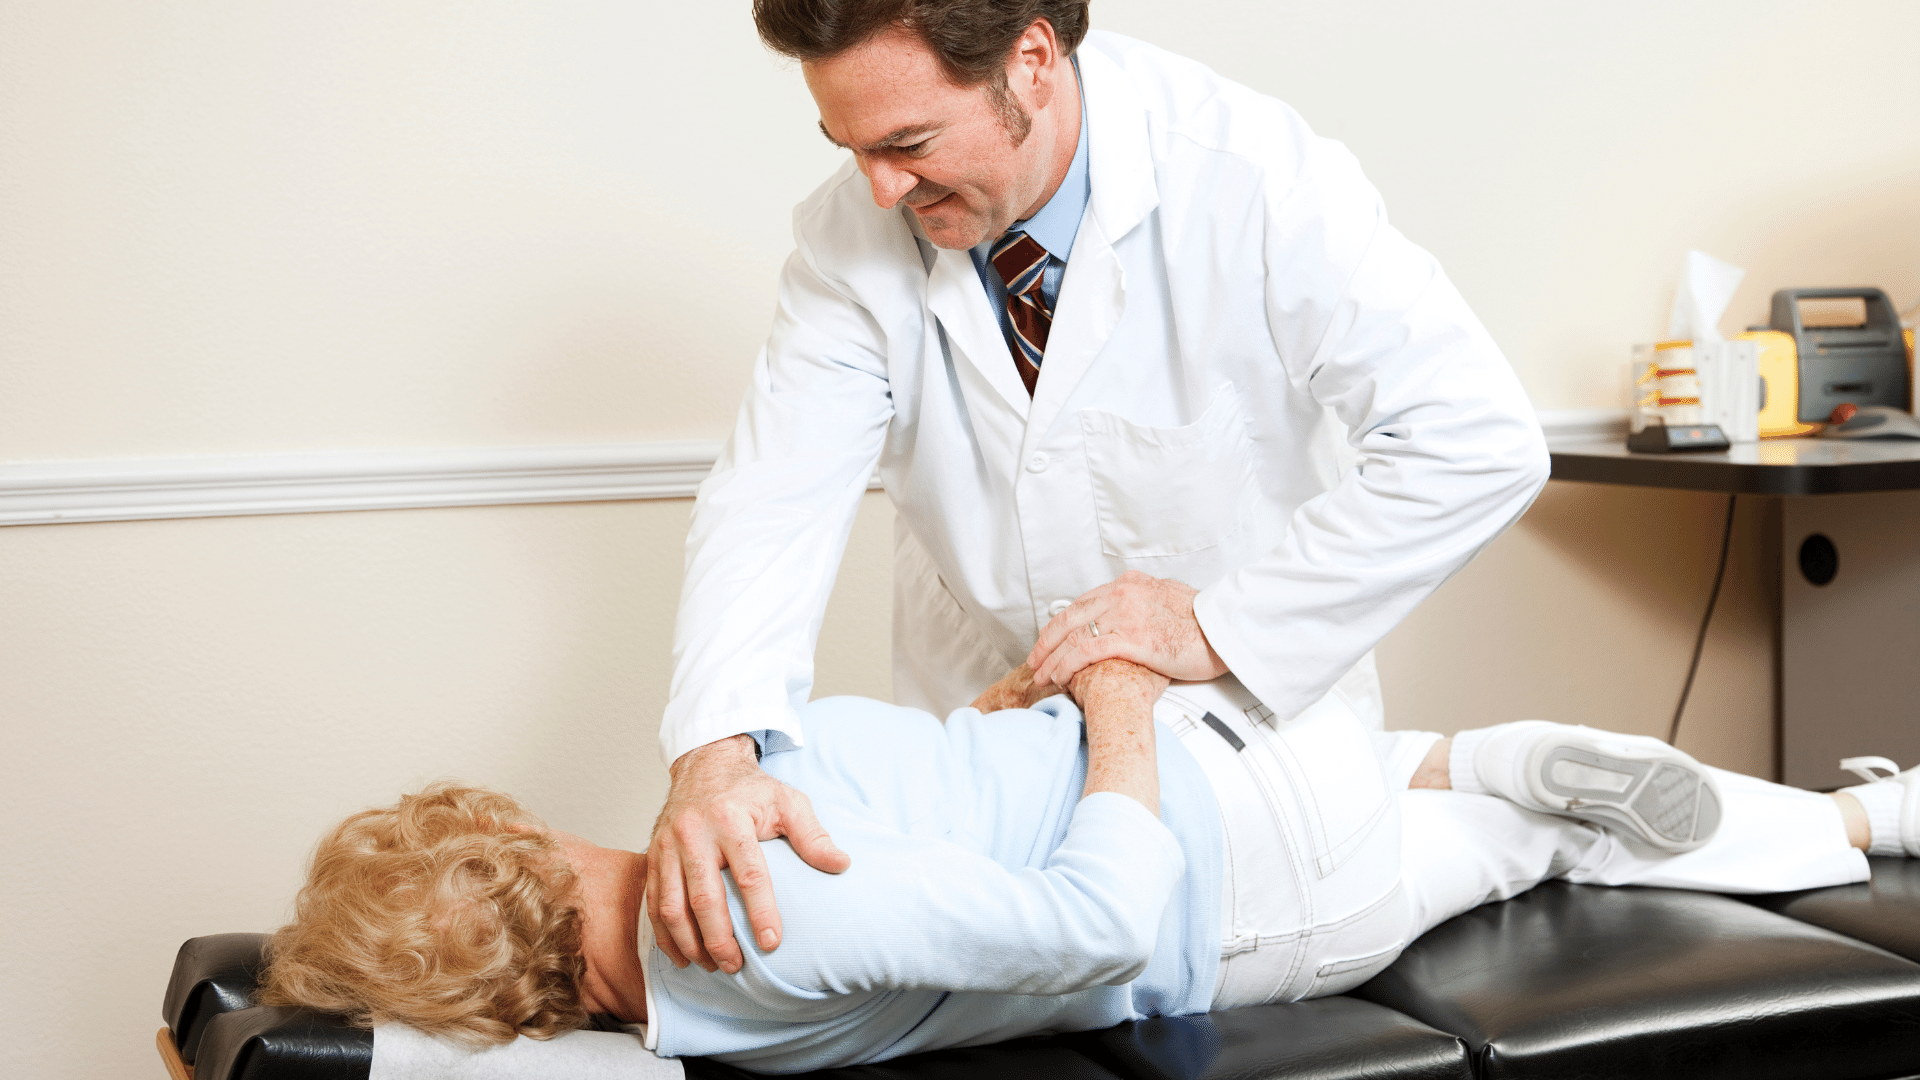 conditions that chiropractor caring for elderly patient